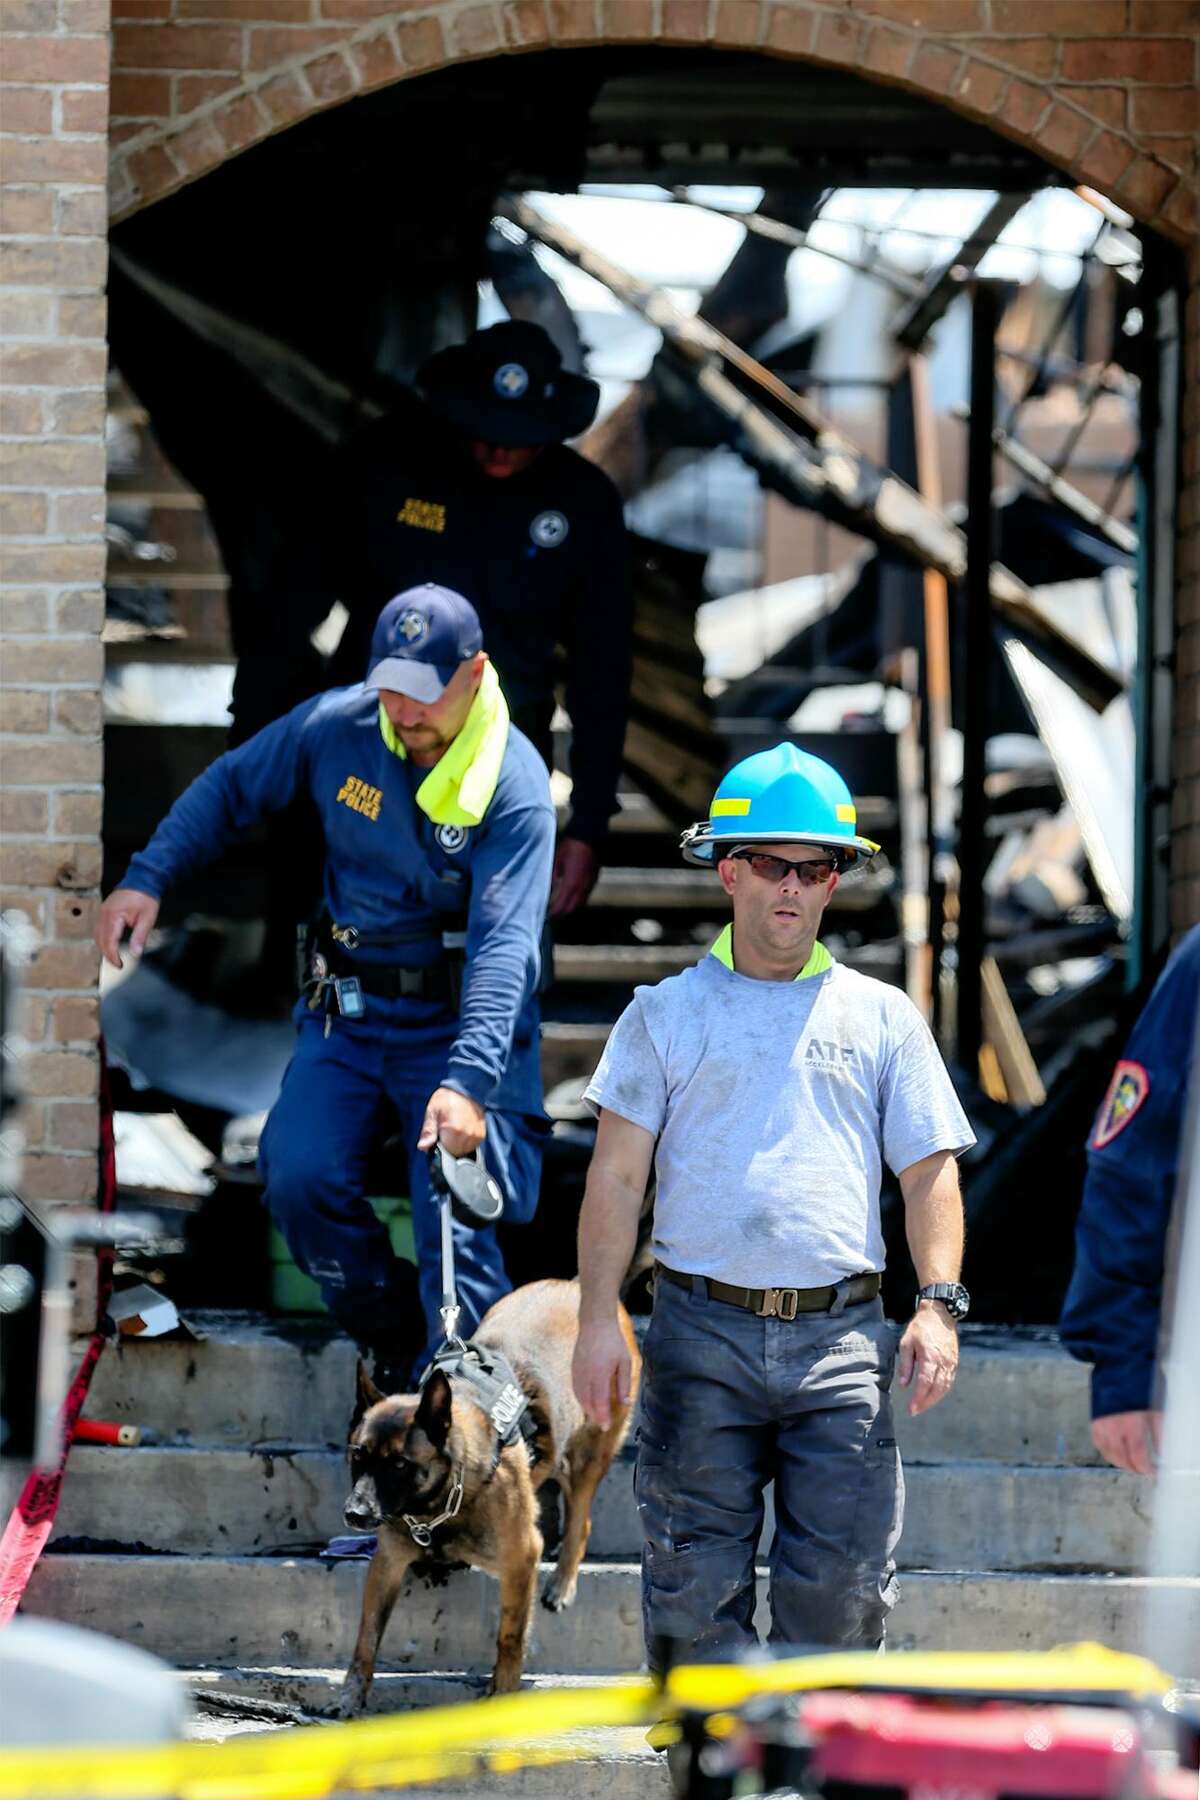 Investigators walk through an entryway at the Iconic Village Apartments in San Marcos on Monday, July 23, 2018. Four victims have been recovered so far from the fire that began at the apartment complex at 4:30 a.m. and affected three apartment buildings on Friday, July, 20. Five people are still unaccounted for. Officials do not yet know the origin of the fire, how it started. or what the total number of victims will be.